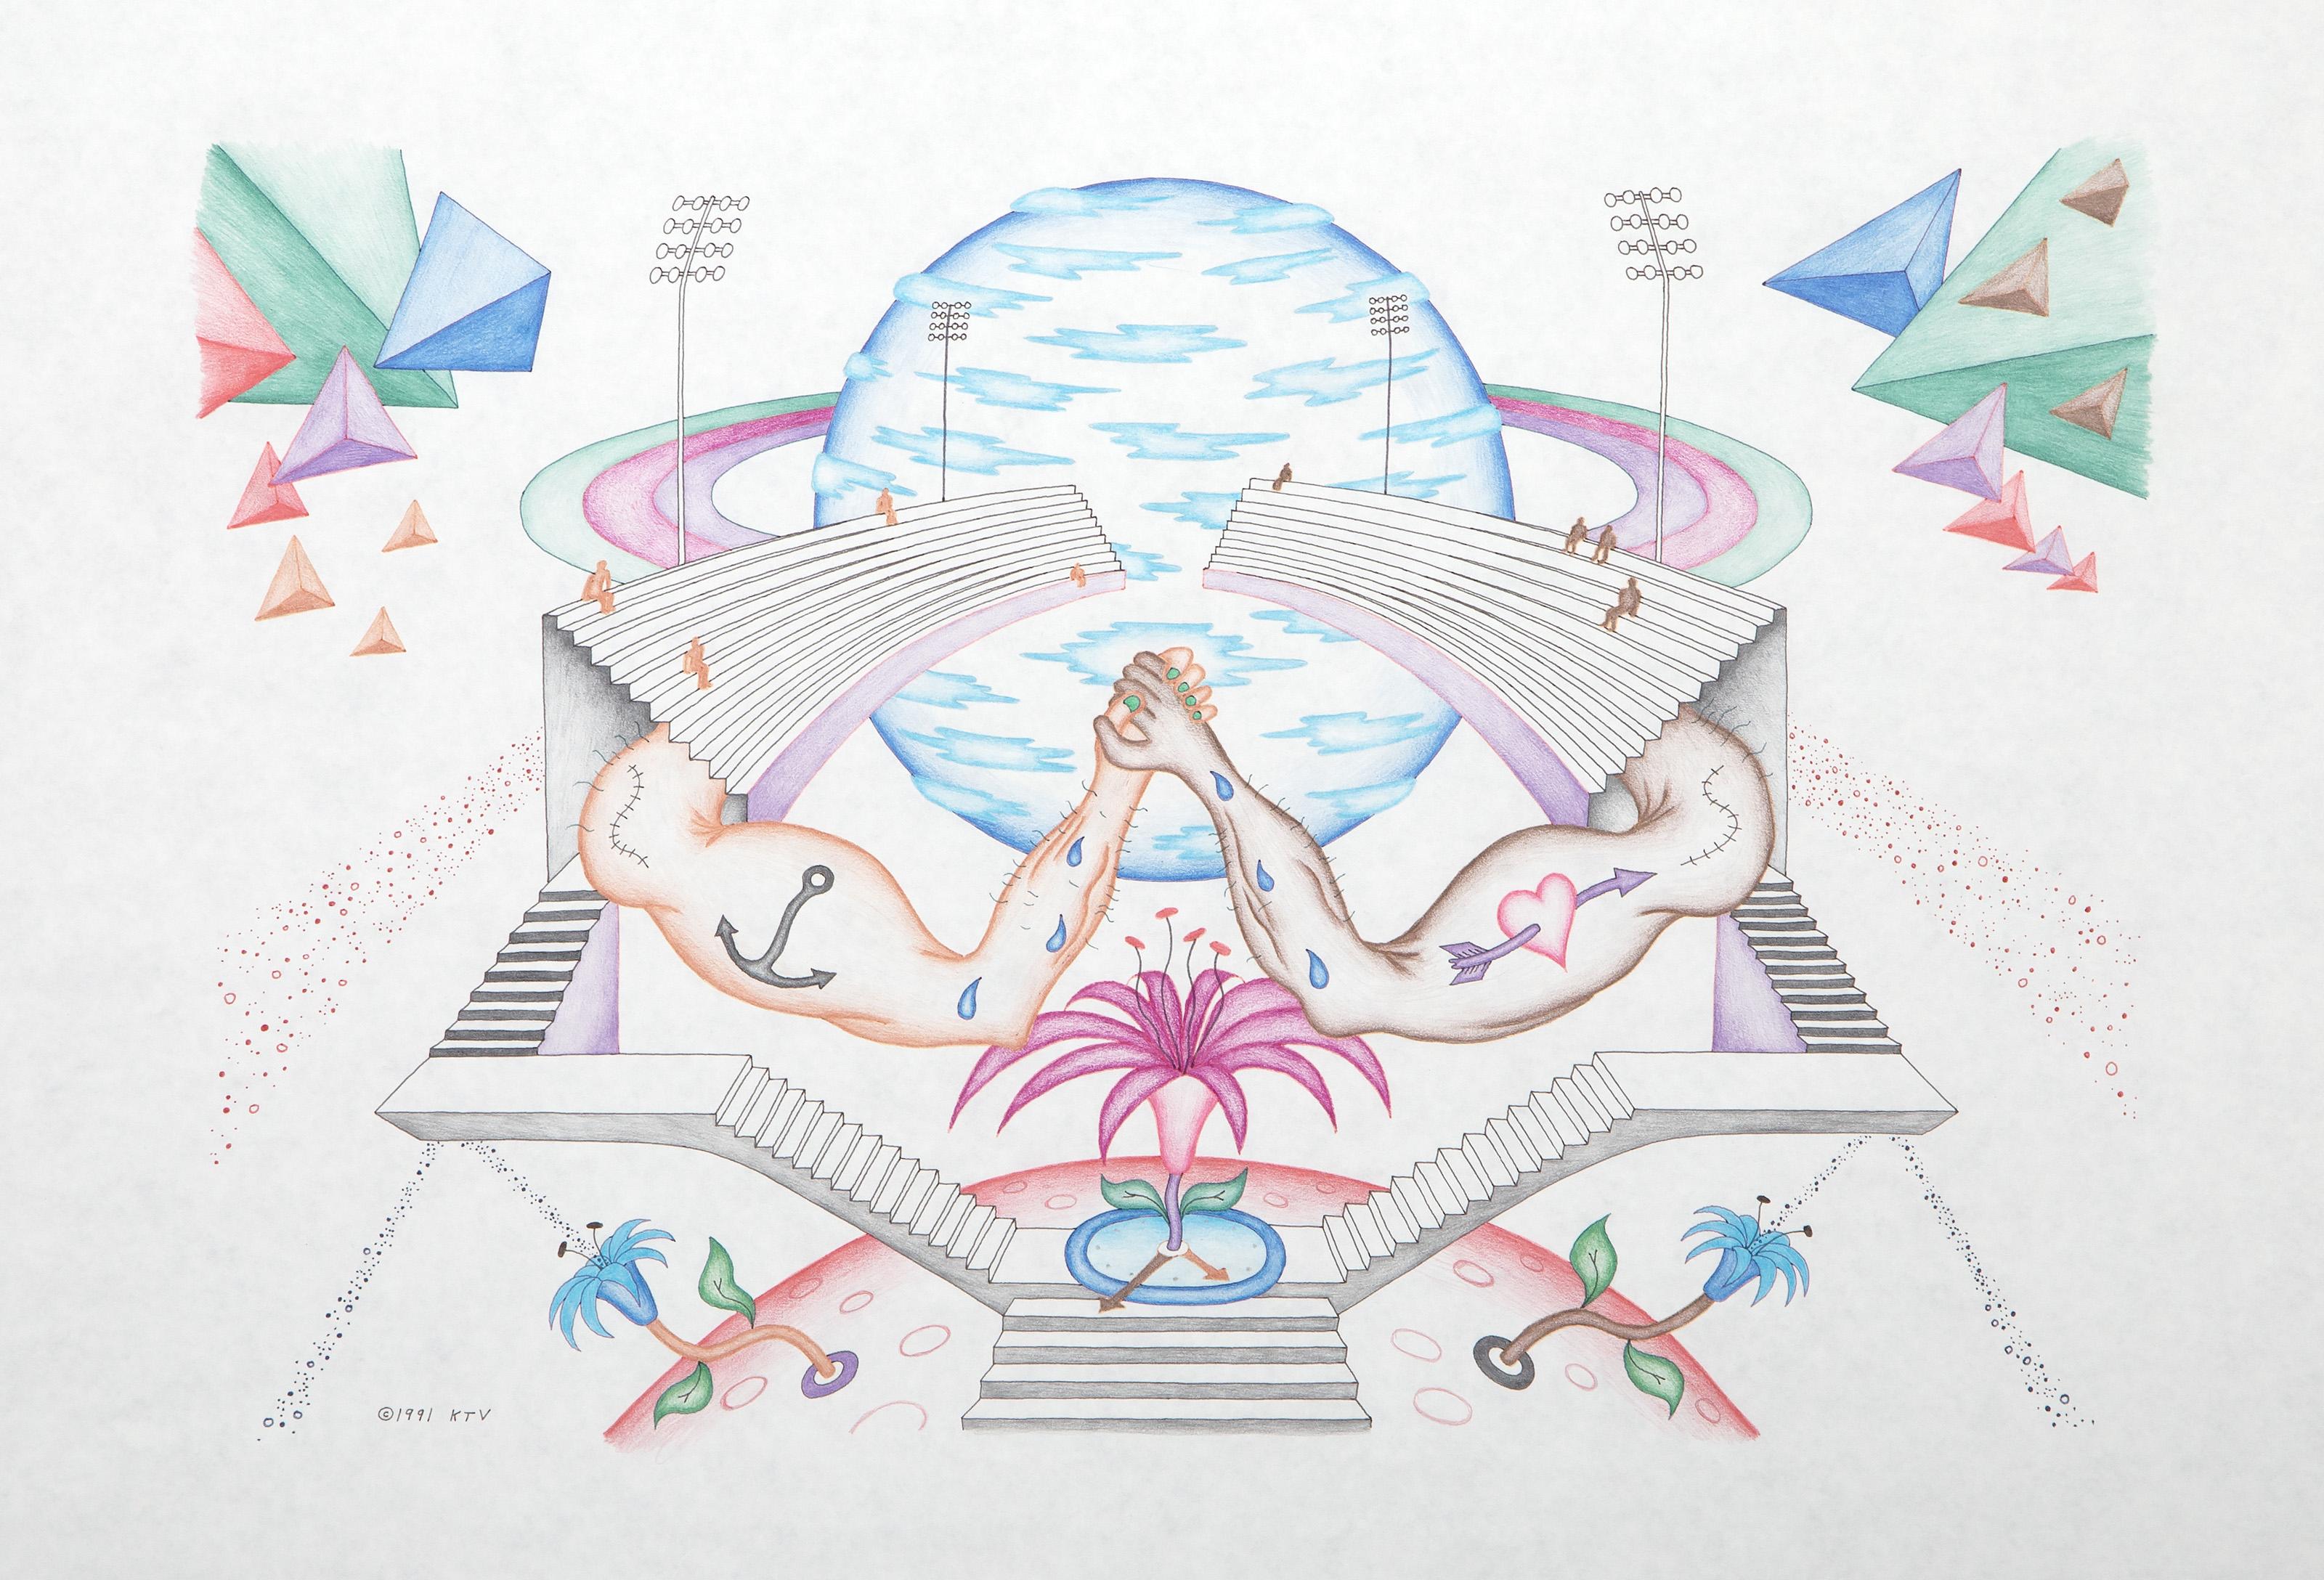 Kevin Varner, American (1954 - 2019) -  The Interplanetary Stadium. Year: 1991, Medium: Color Pencil and Ink on Paper, signed and dated, titled on verso, Image Size: 10.5 x 21 inches, Size: 18 x 23.75 in. (45.72 x 60.33 cm) 